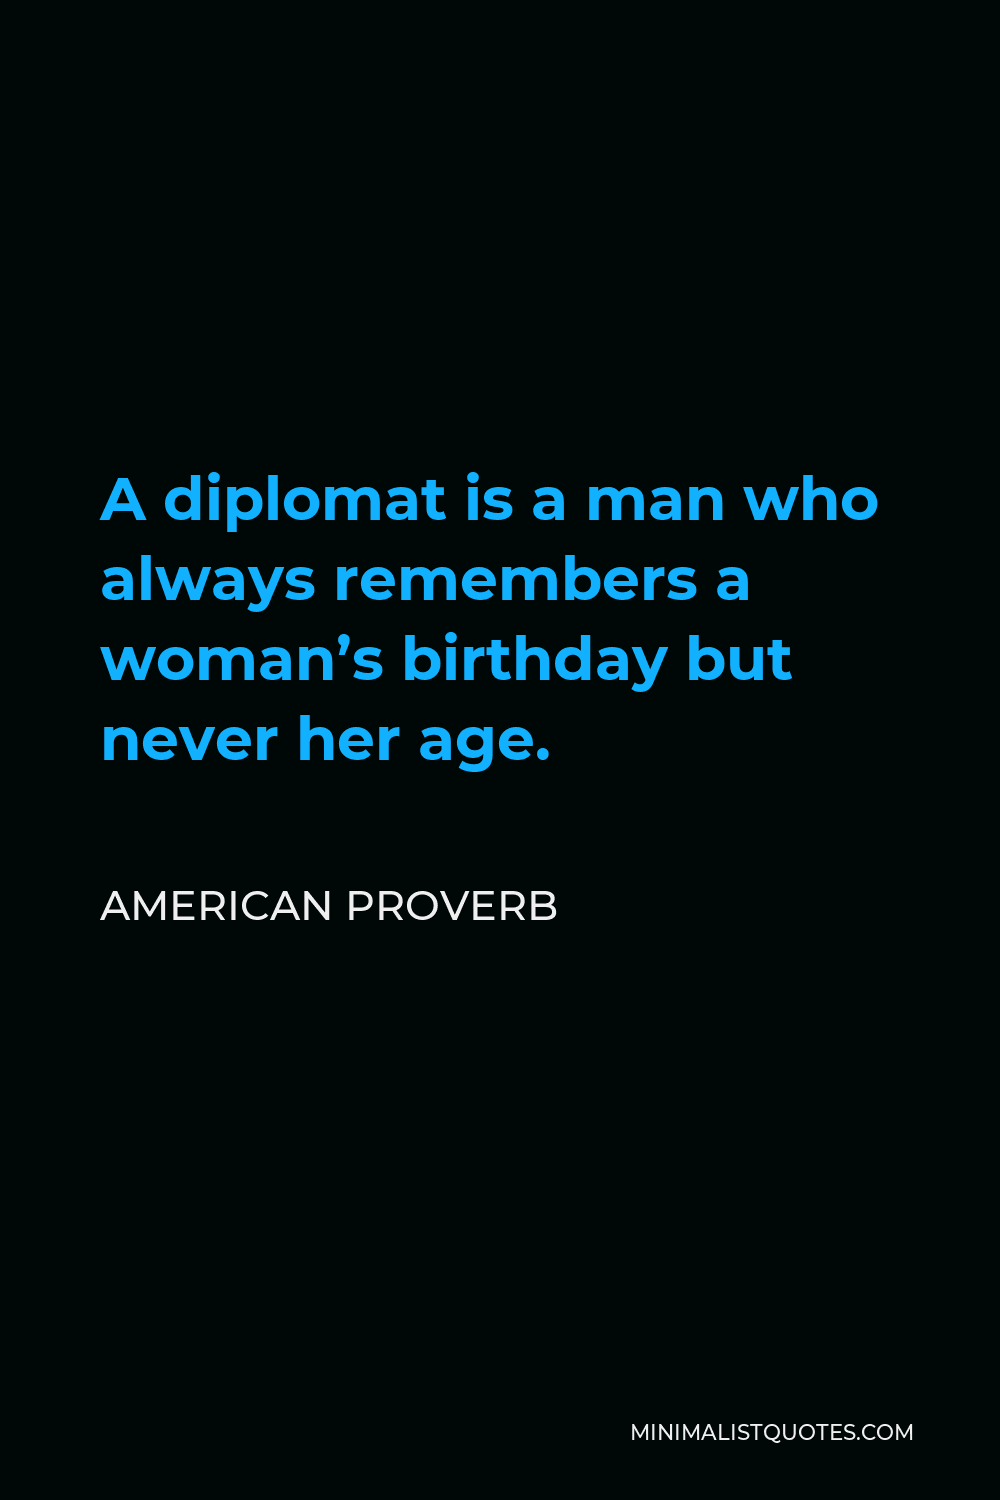 American Proverb Quote - A diplomat is a man who always remembers a woman’s birthday but never her age.